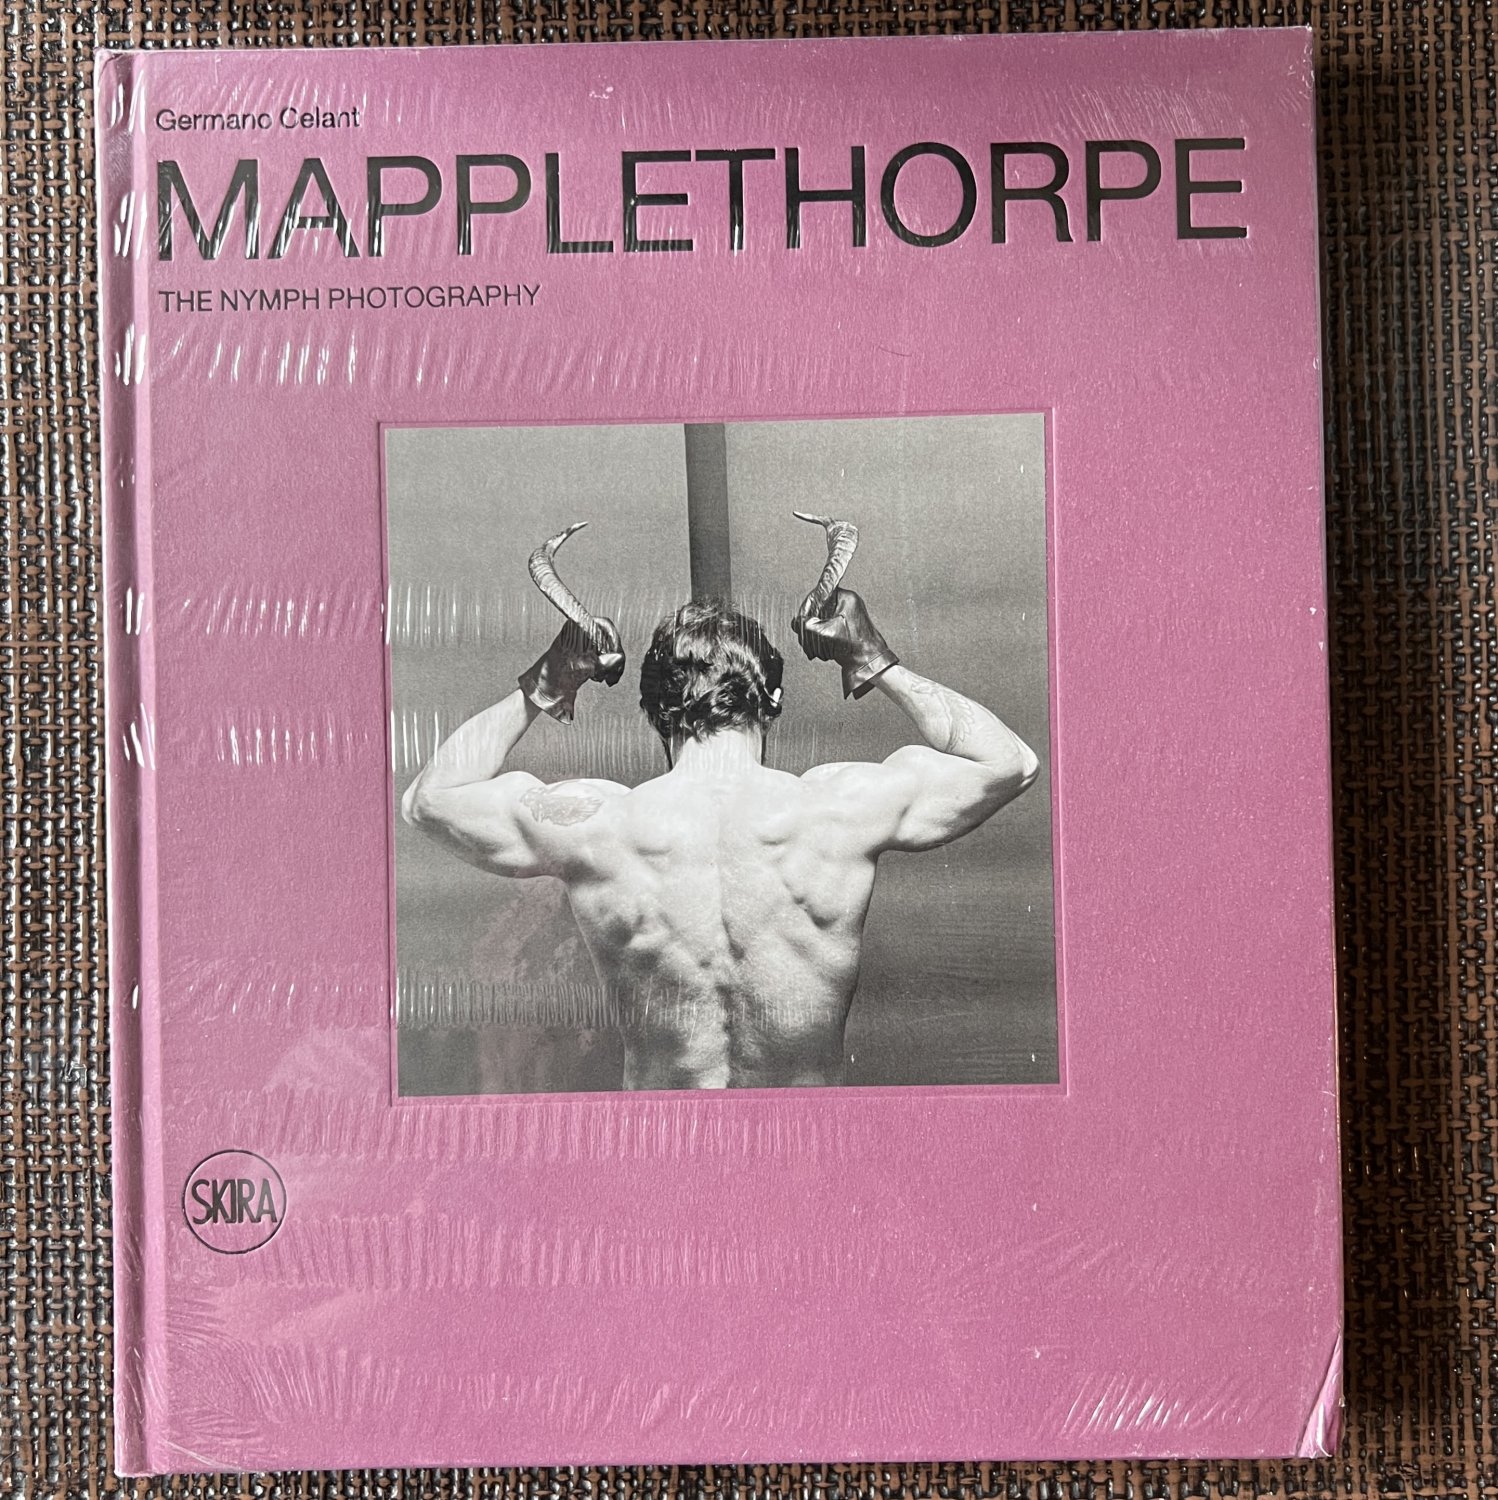 ROBERT MAPPLETHORPE Nymph Photography (2014) Gay Male NUDES Muscle Queer Homo Erotic Photos